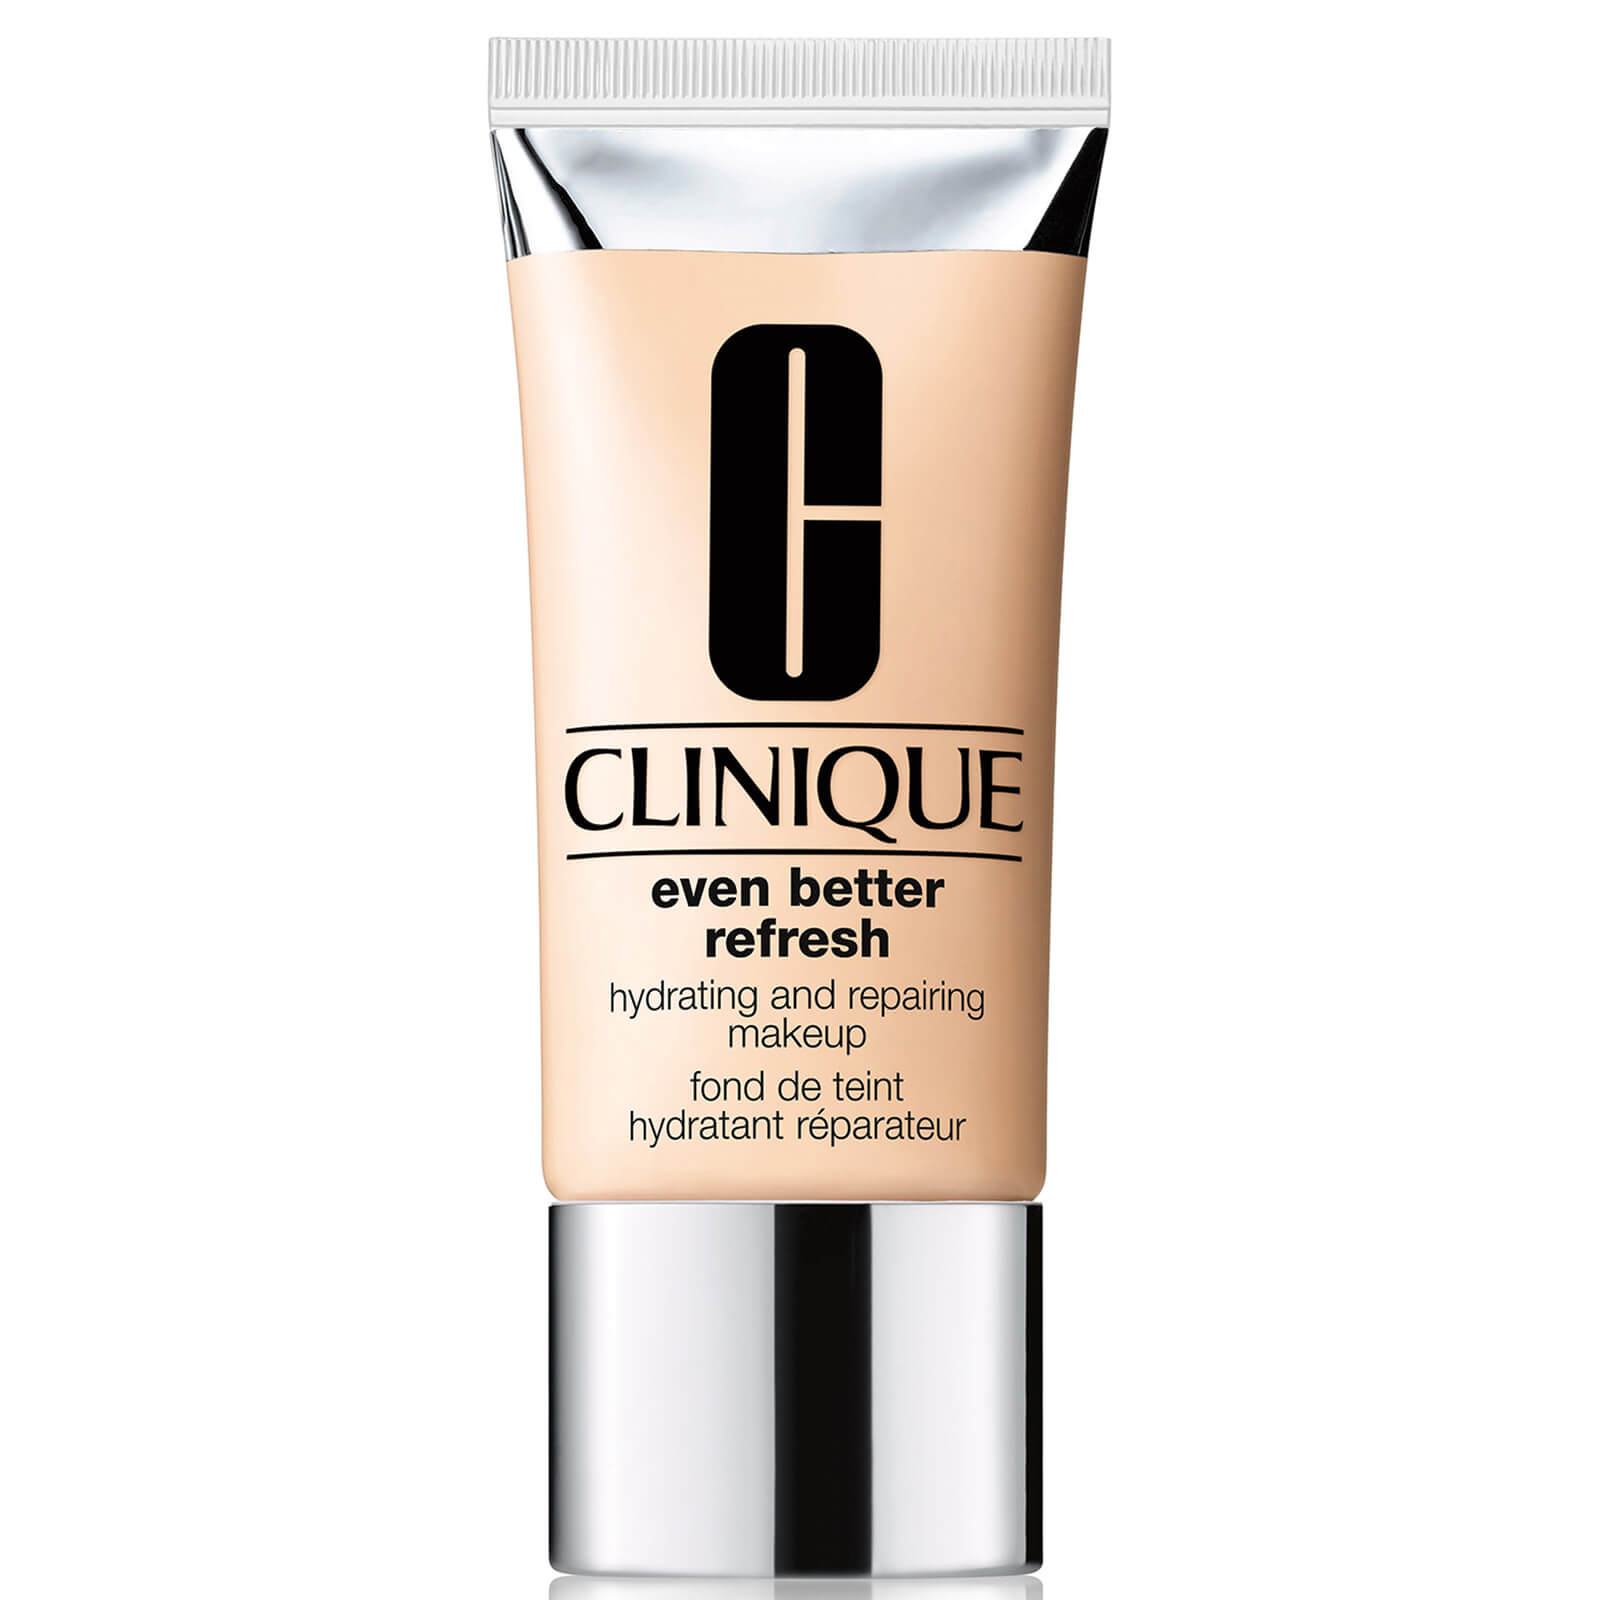 Clinique Even Better Refresh Hydrating and Repairing Makeup 30ml (Various Shades) - WN 04 Bone